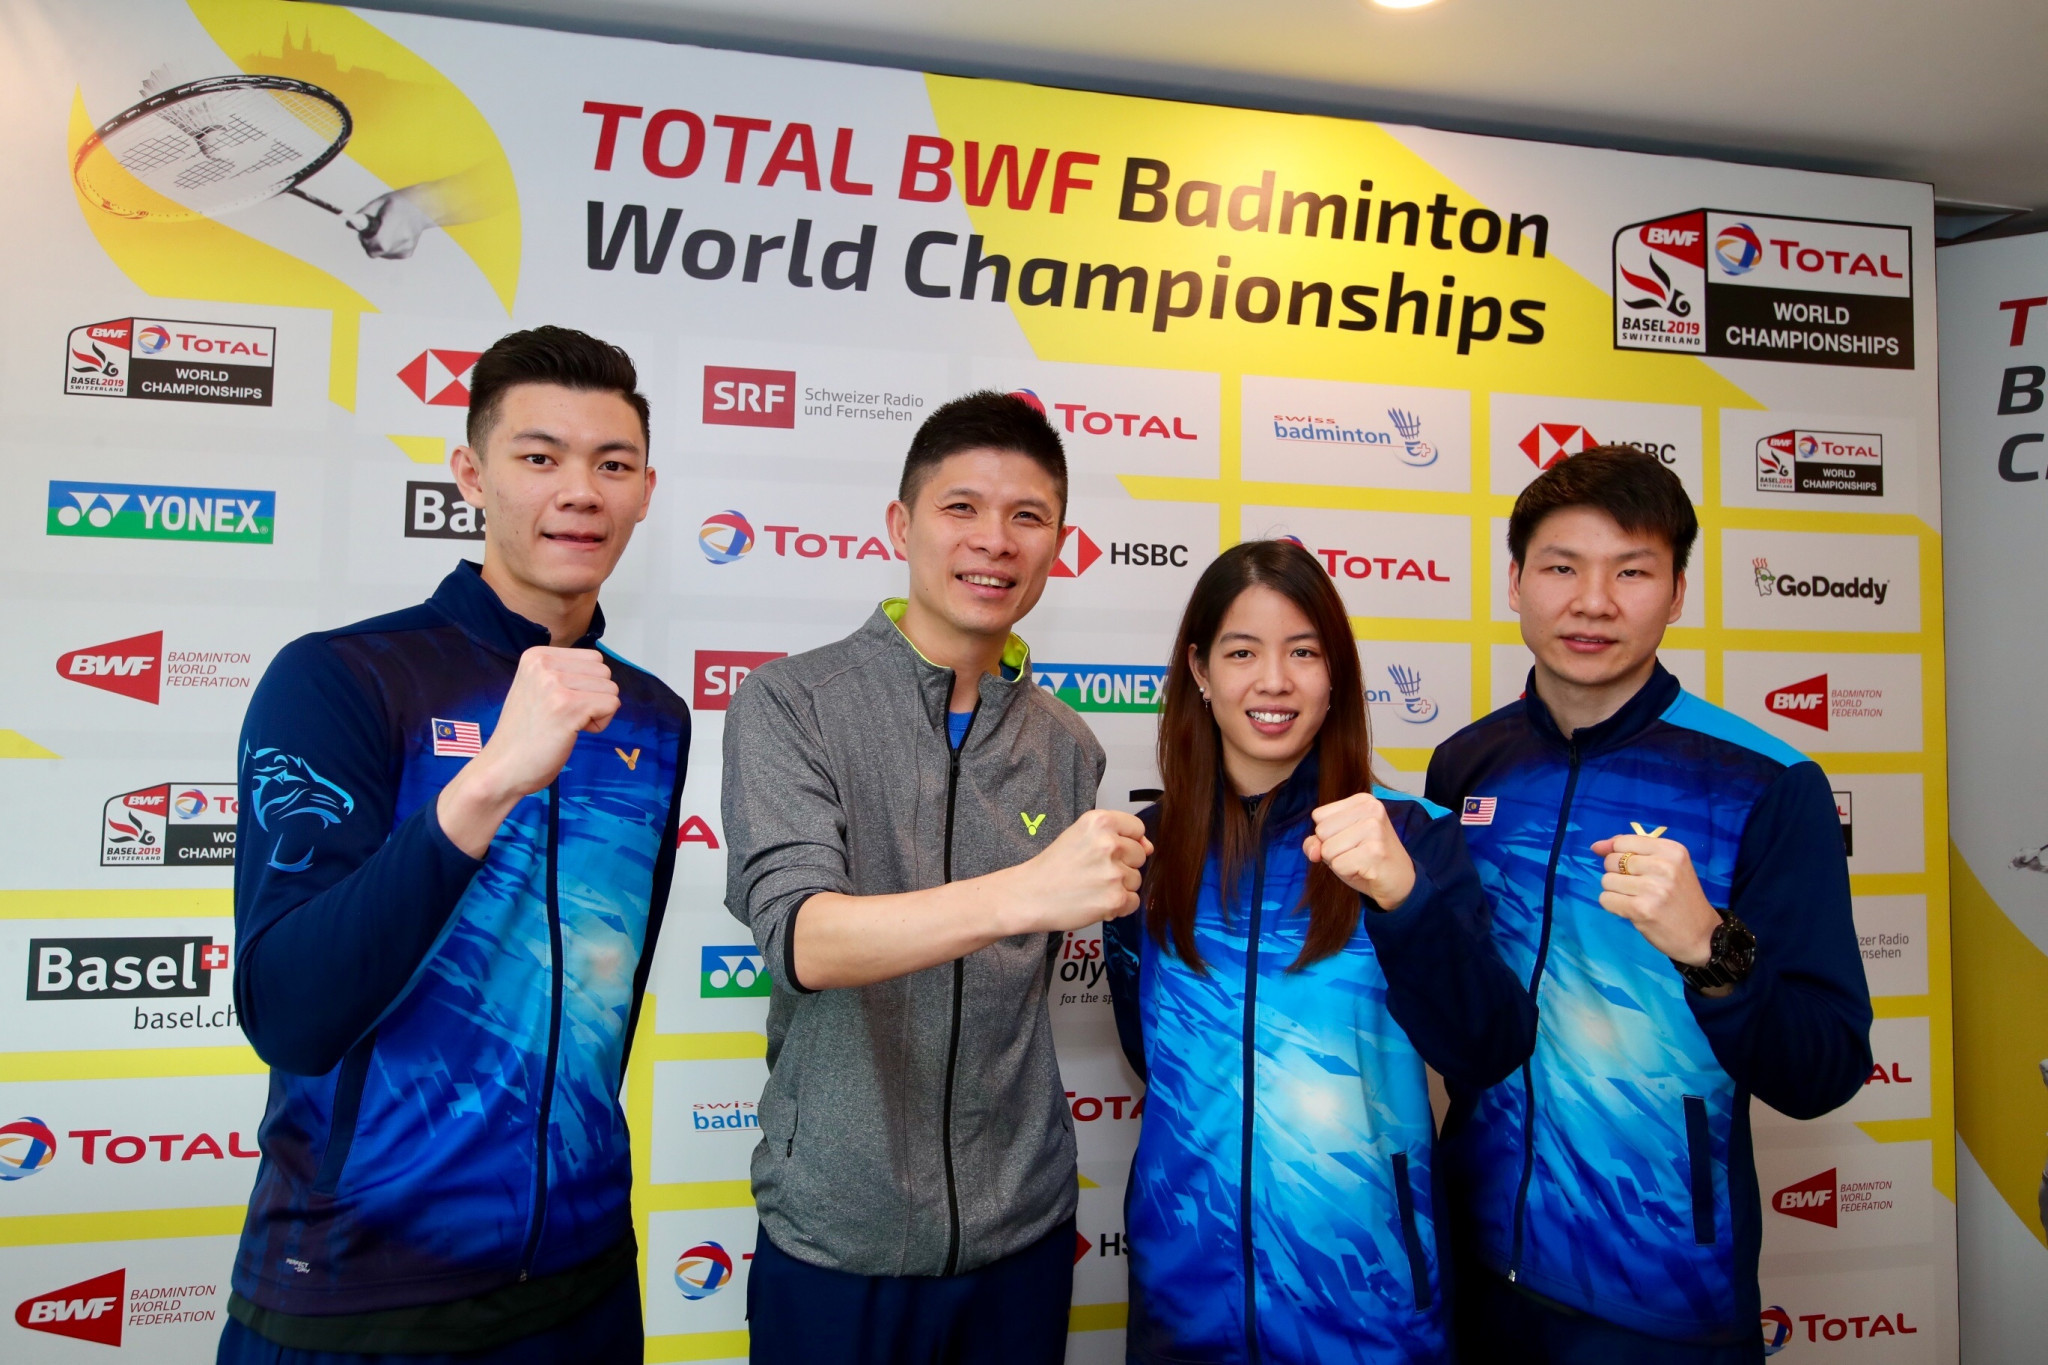 Malaysia team members Lee Zii Jia, Wong Choong Hann, Shevon Jemie Lai and Goh Soon Huat were among those in attendance at the draw ©BWF